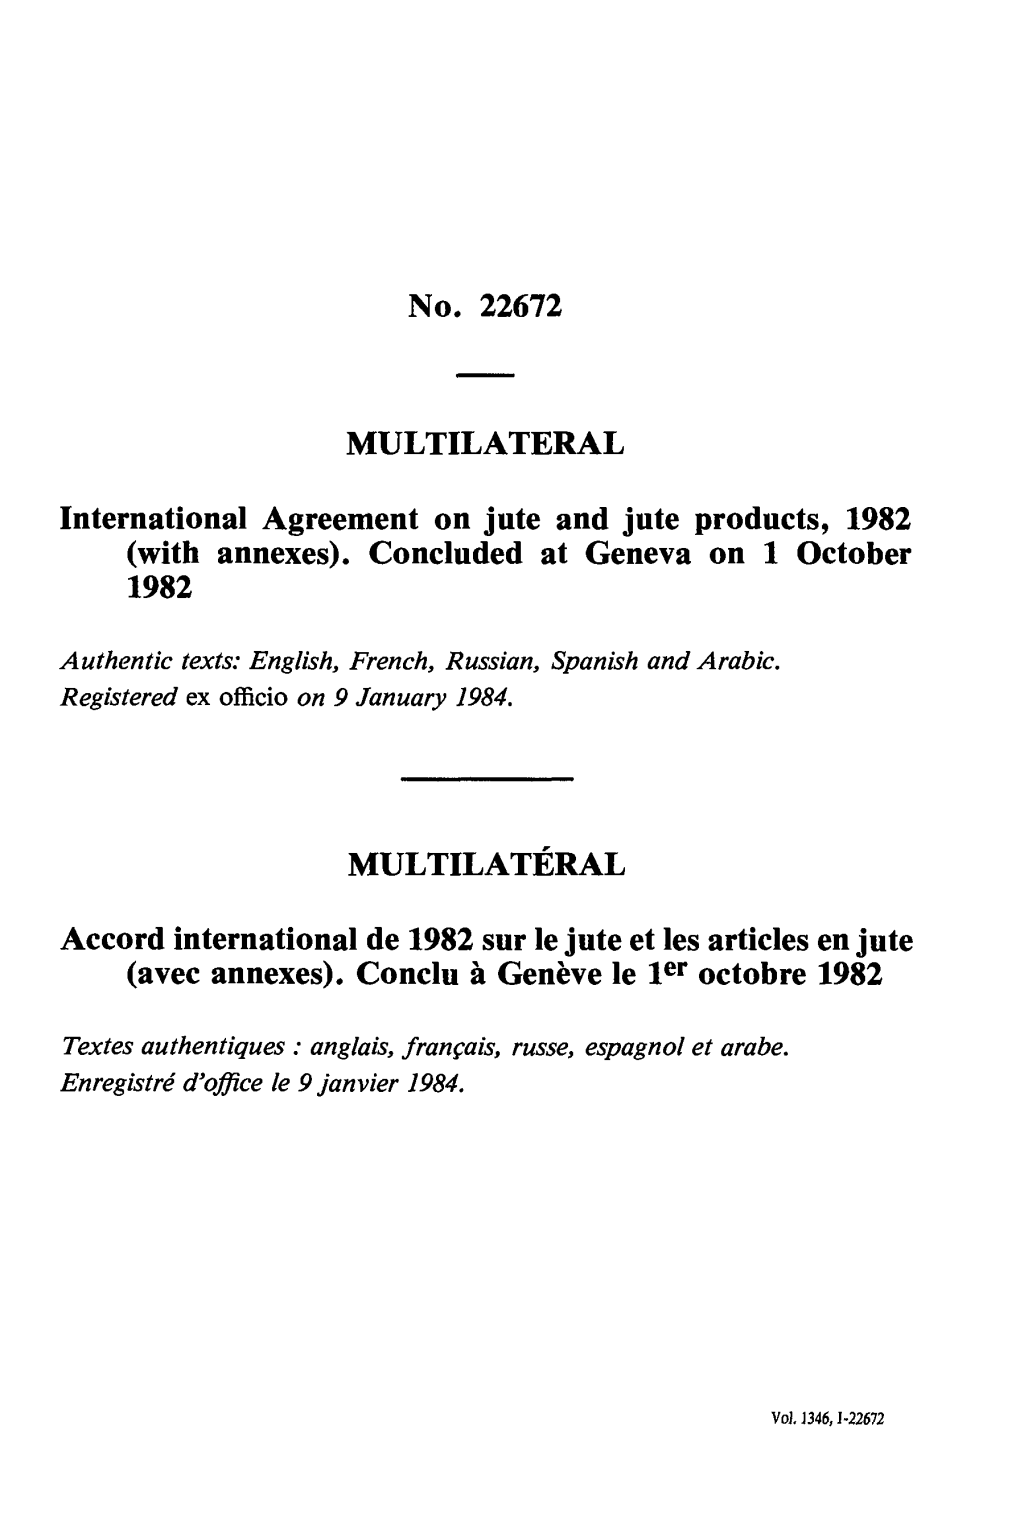 No. 22672 MULTILATERAL International Agreement on Jute and Jute Products, 1982